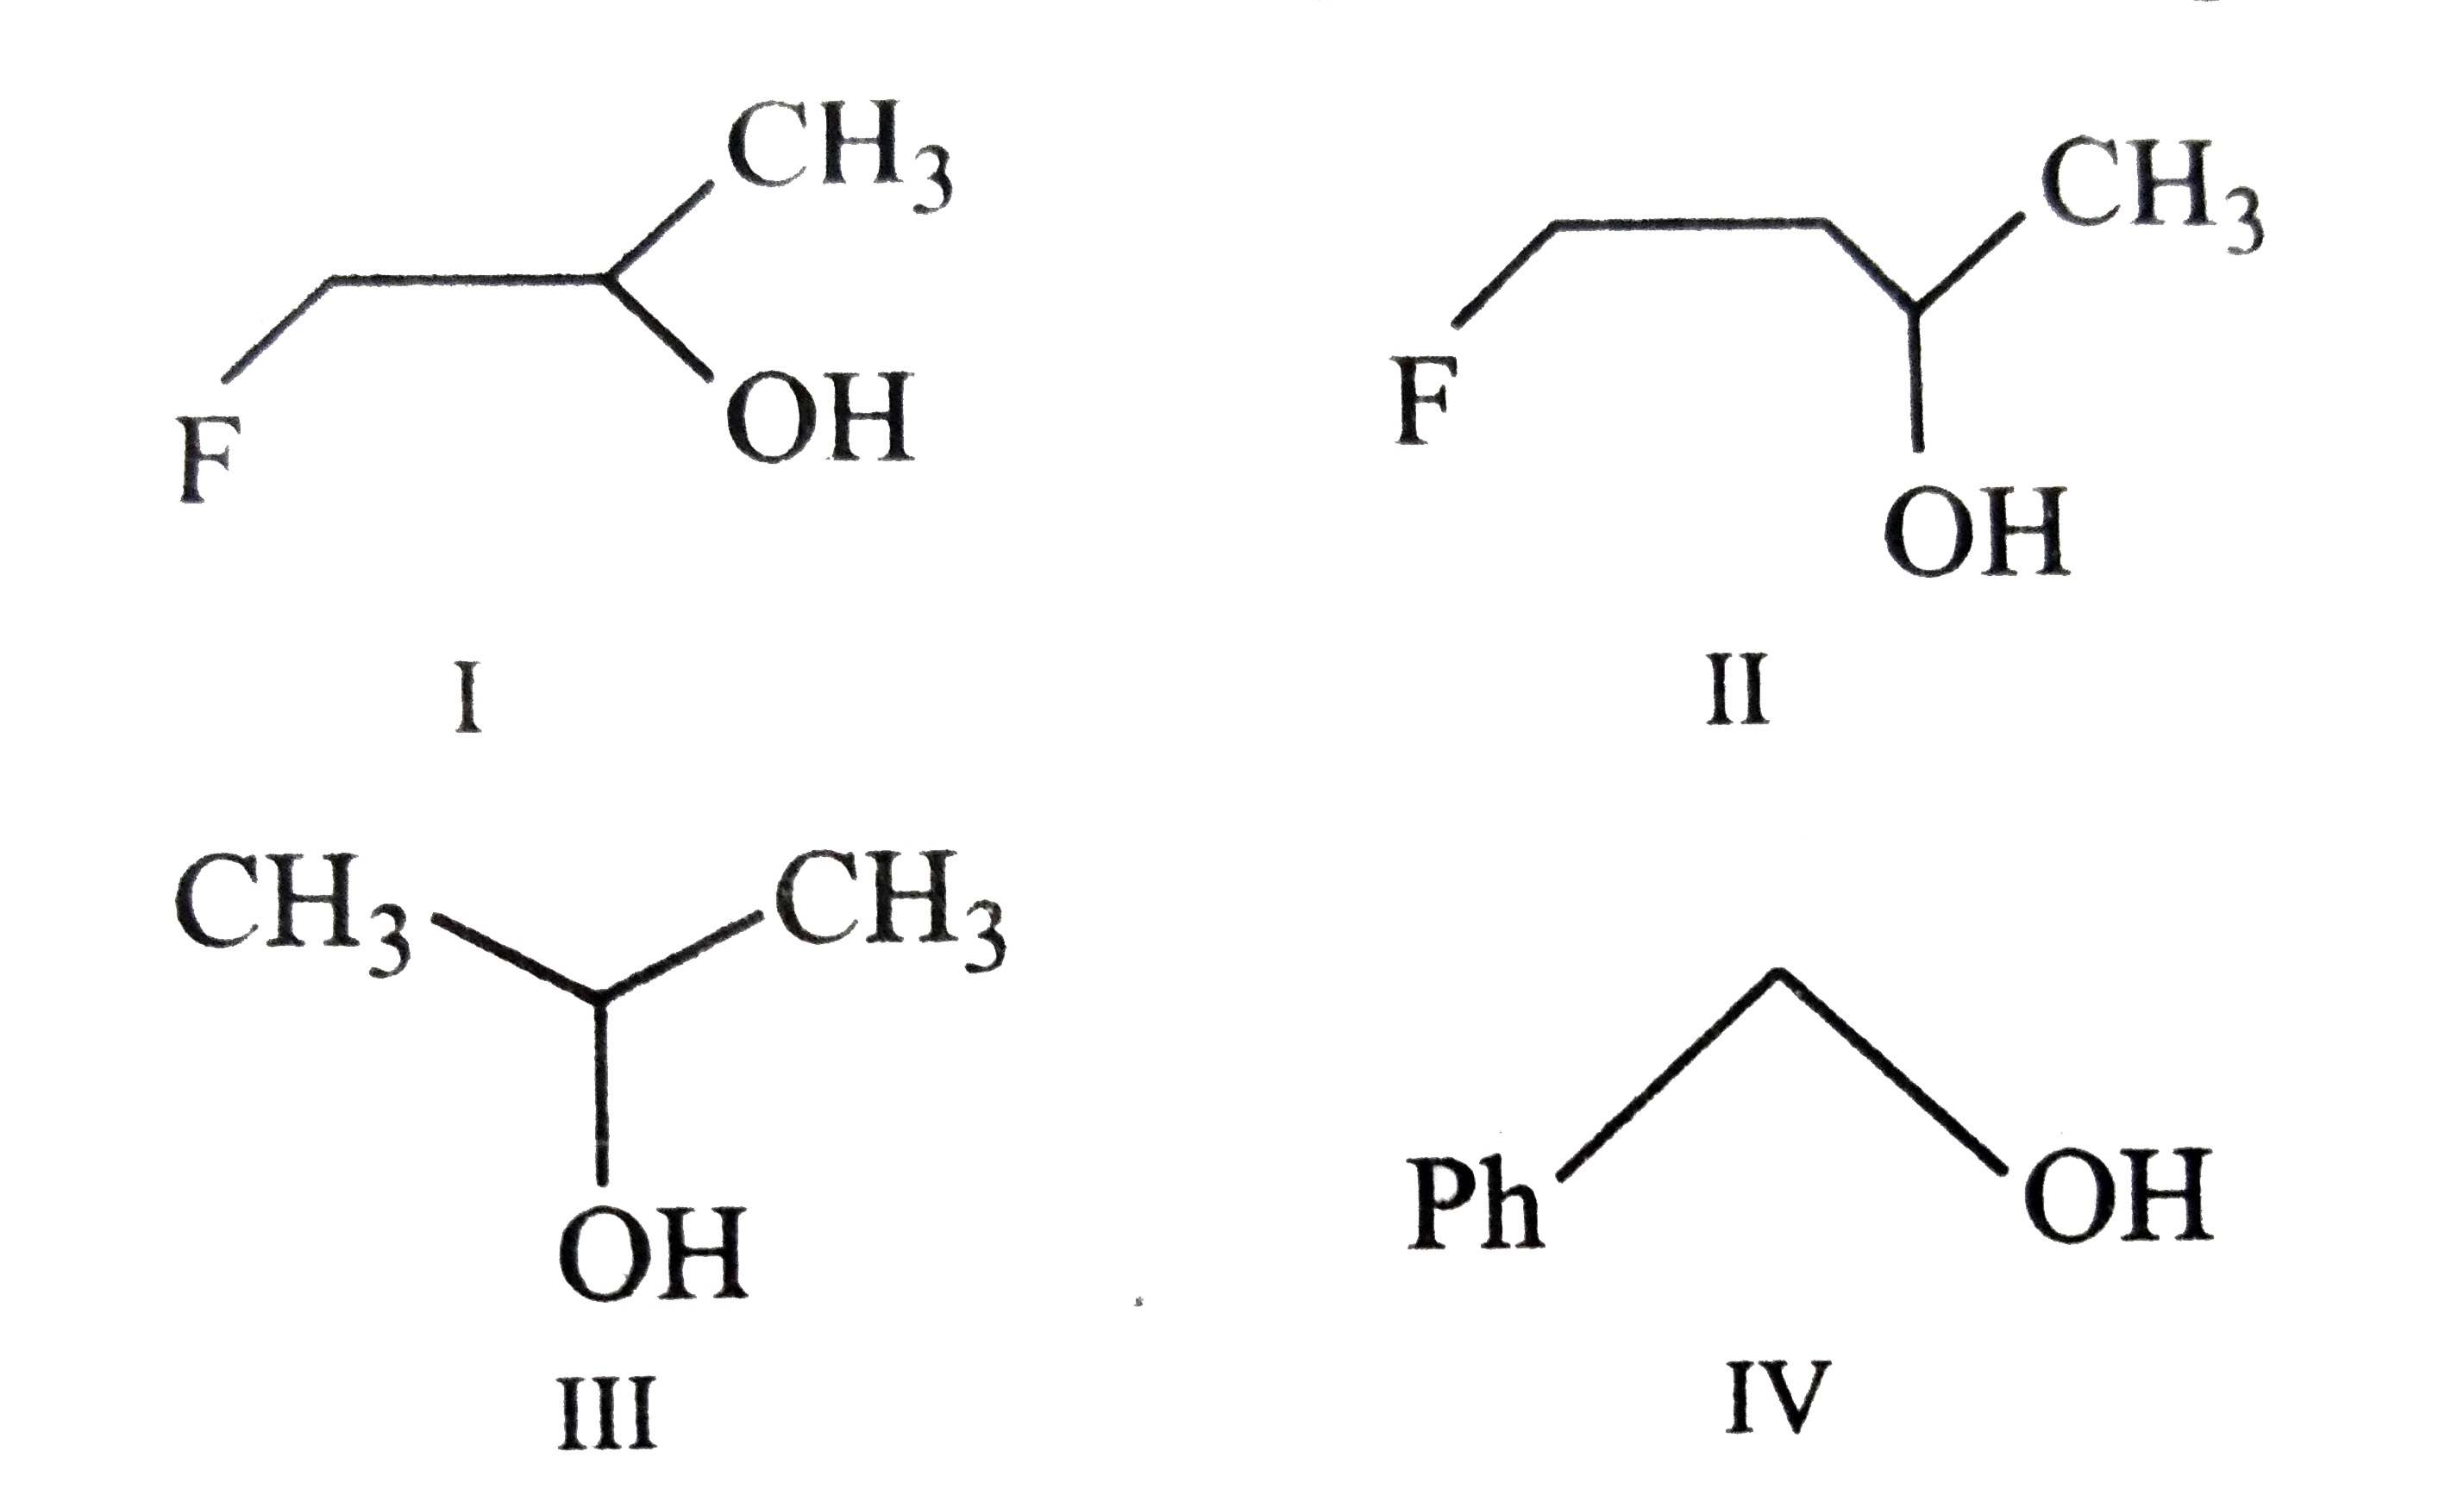 The order of reactivity of the following alcohols      towards conc. HCl is